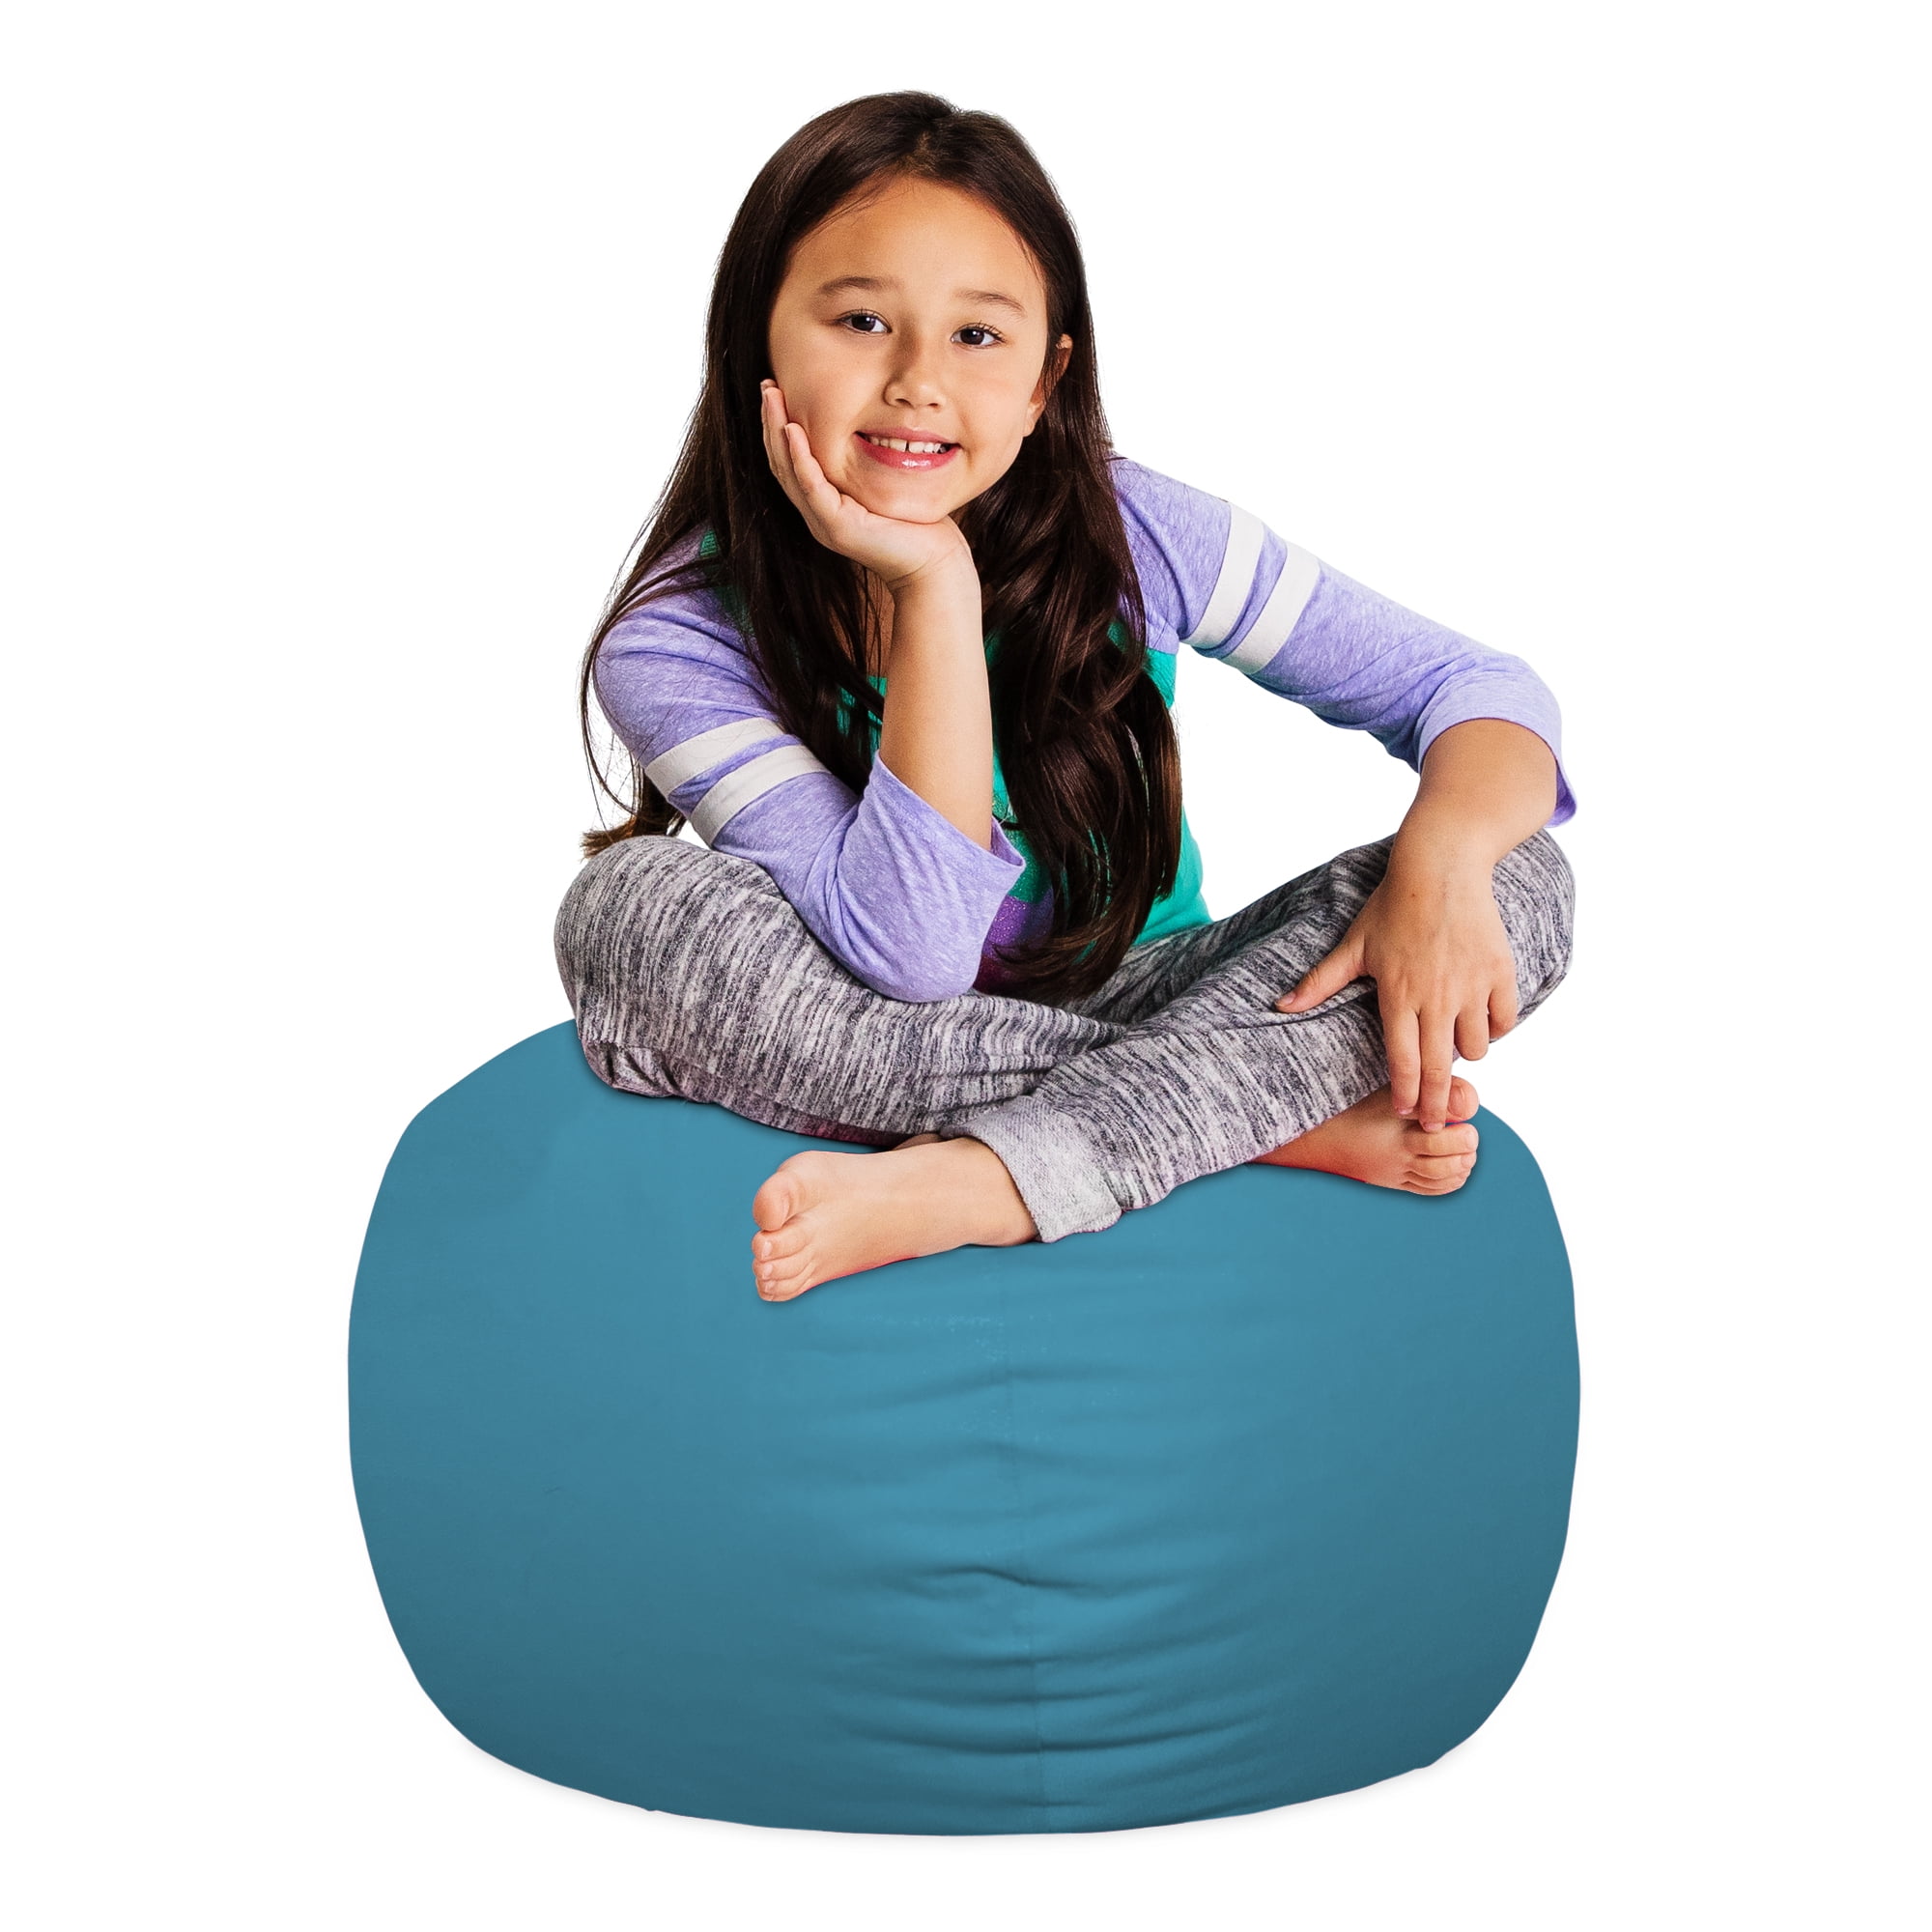 Polyester Cloth Puff Sack Lounger Furniture for All Ages Teens and Adults 27 Inch Big Comfy Bean Bag Chair: Posh Large Beanbag Chairs with Removable Cover for Kids Scrolls Red and Yellow